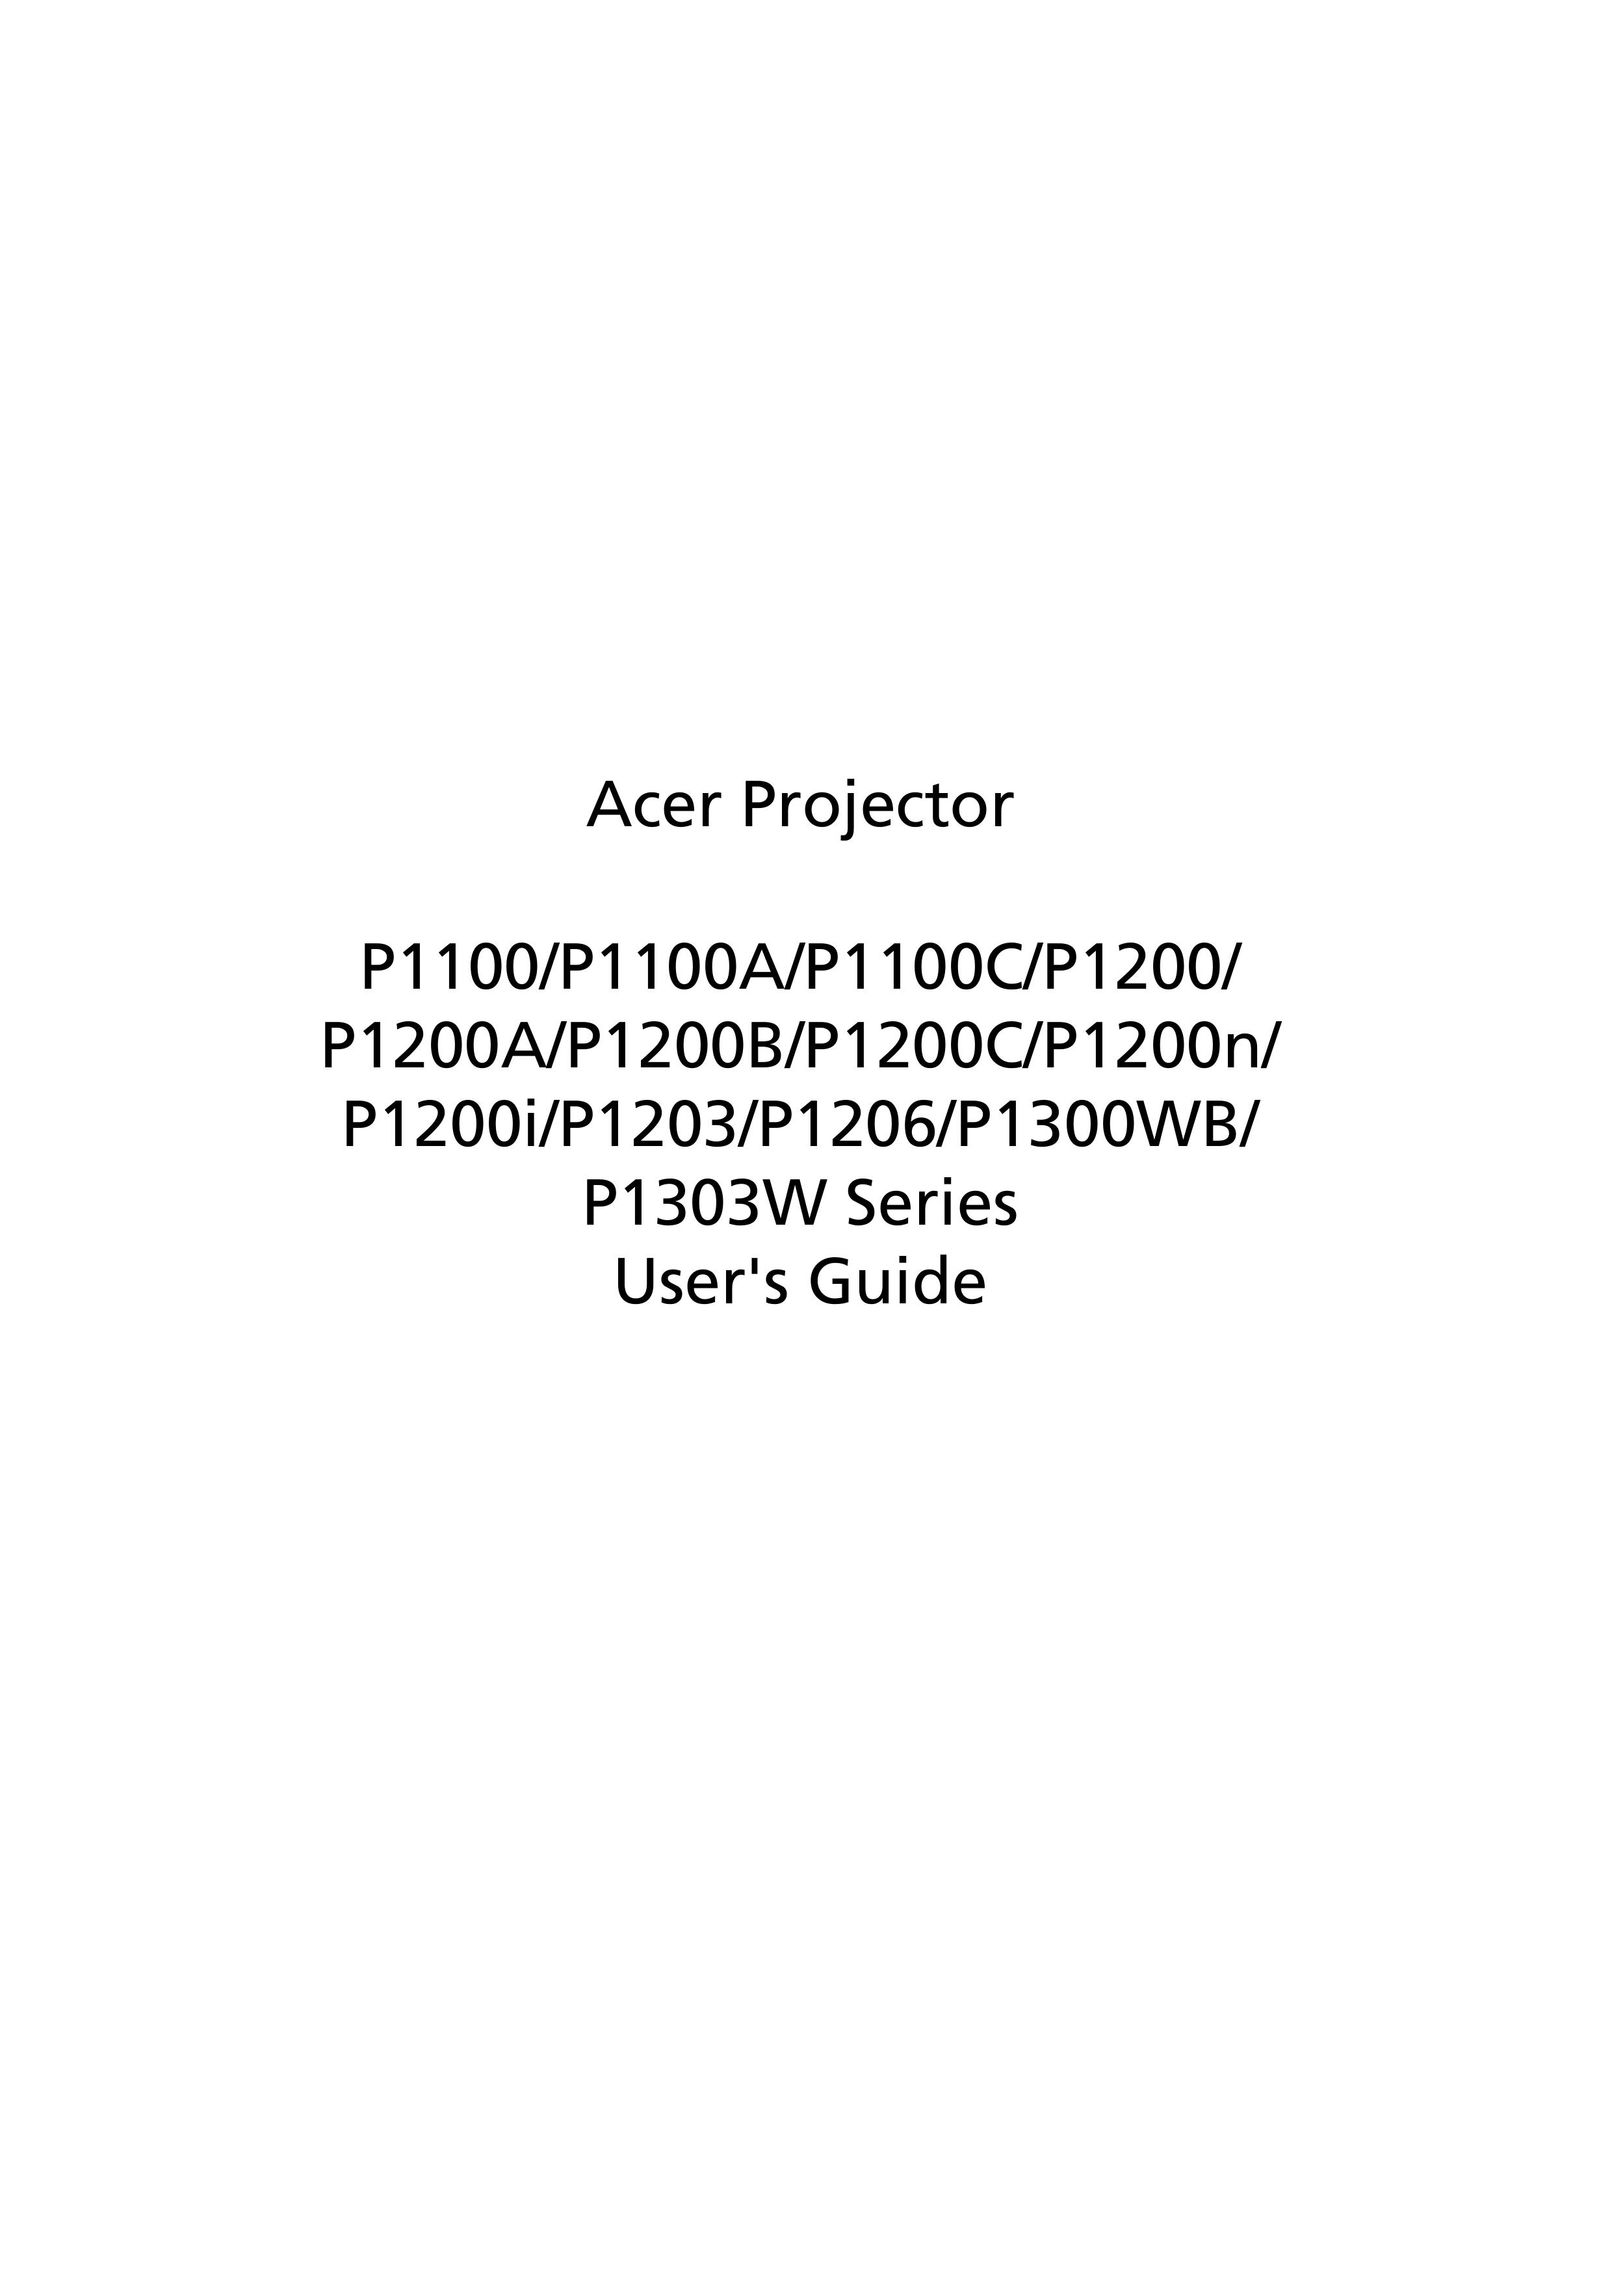 Acer P1206 Projector User Manual